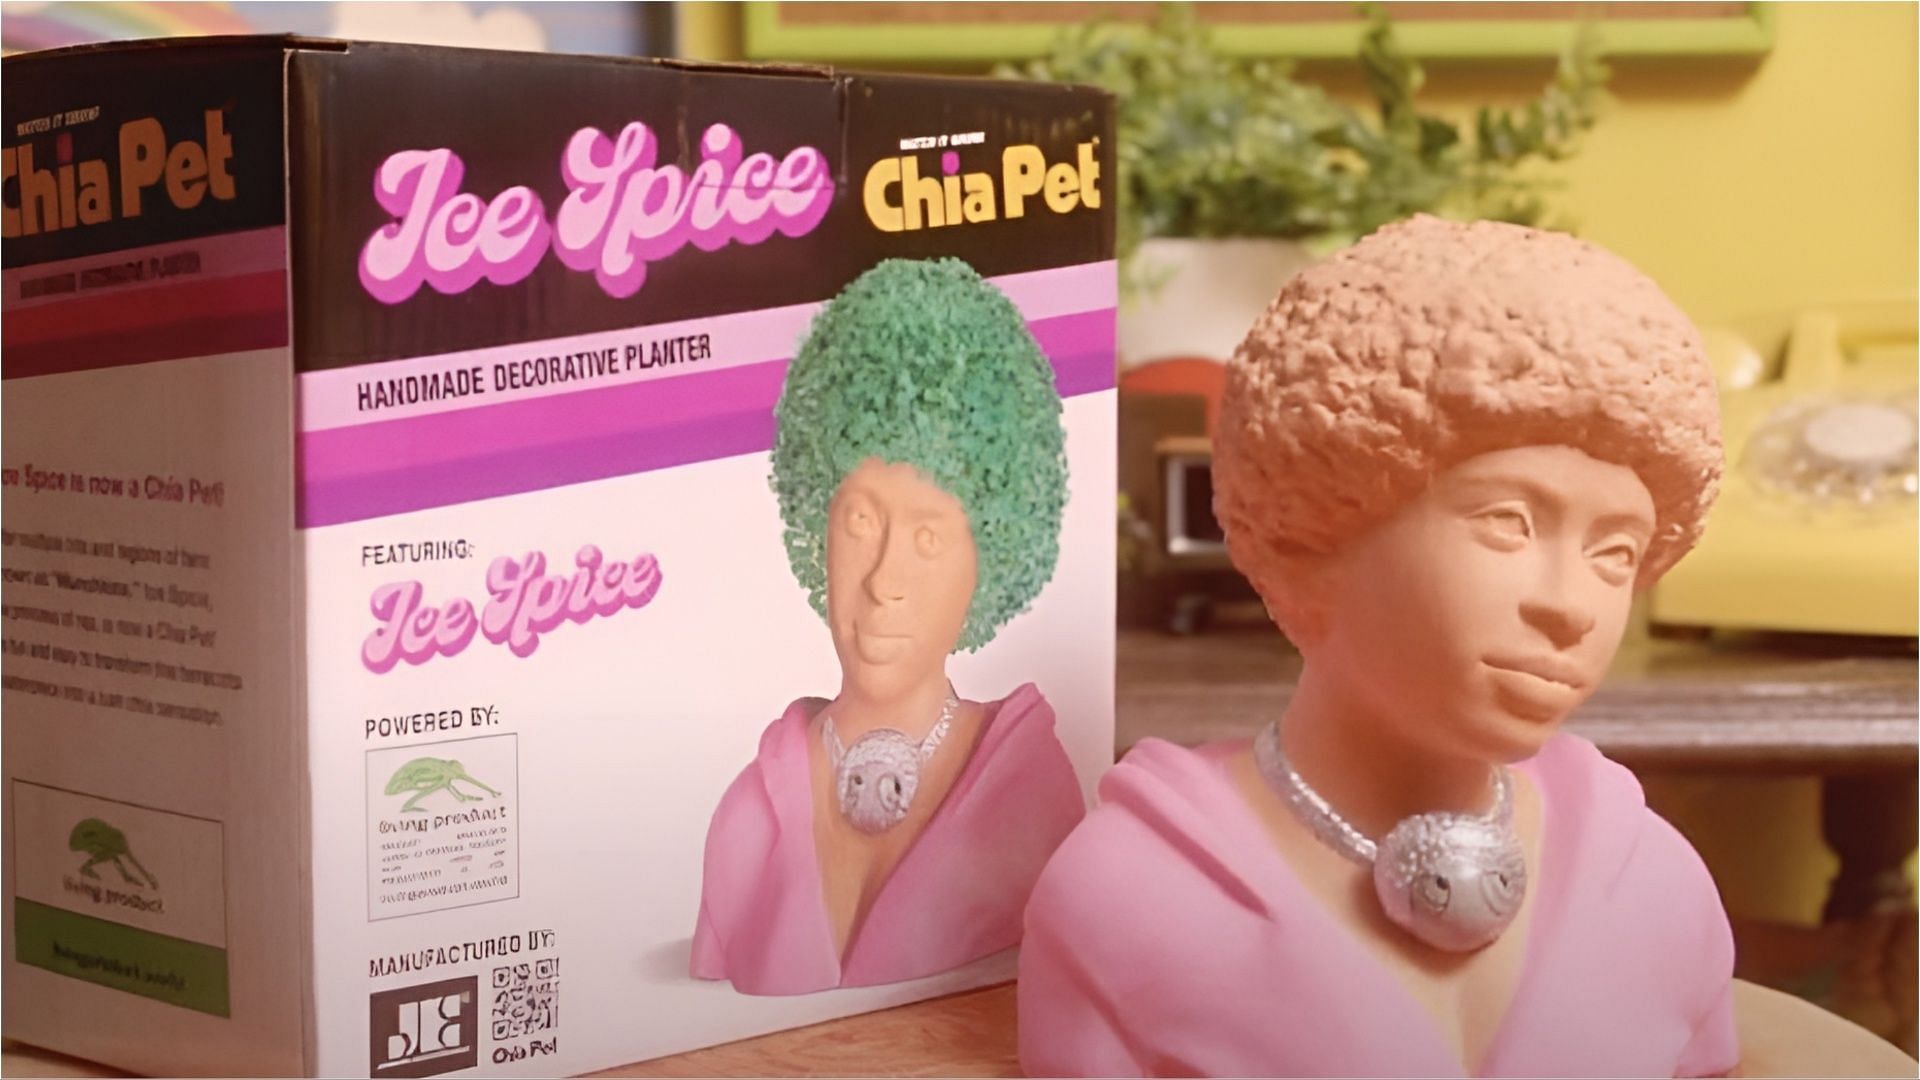 Ice Spice Chia Pet is scheduled to be released soon on shopping sites (Image via gh0sst1n/X)